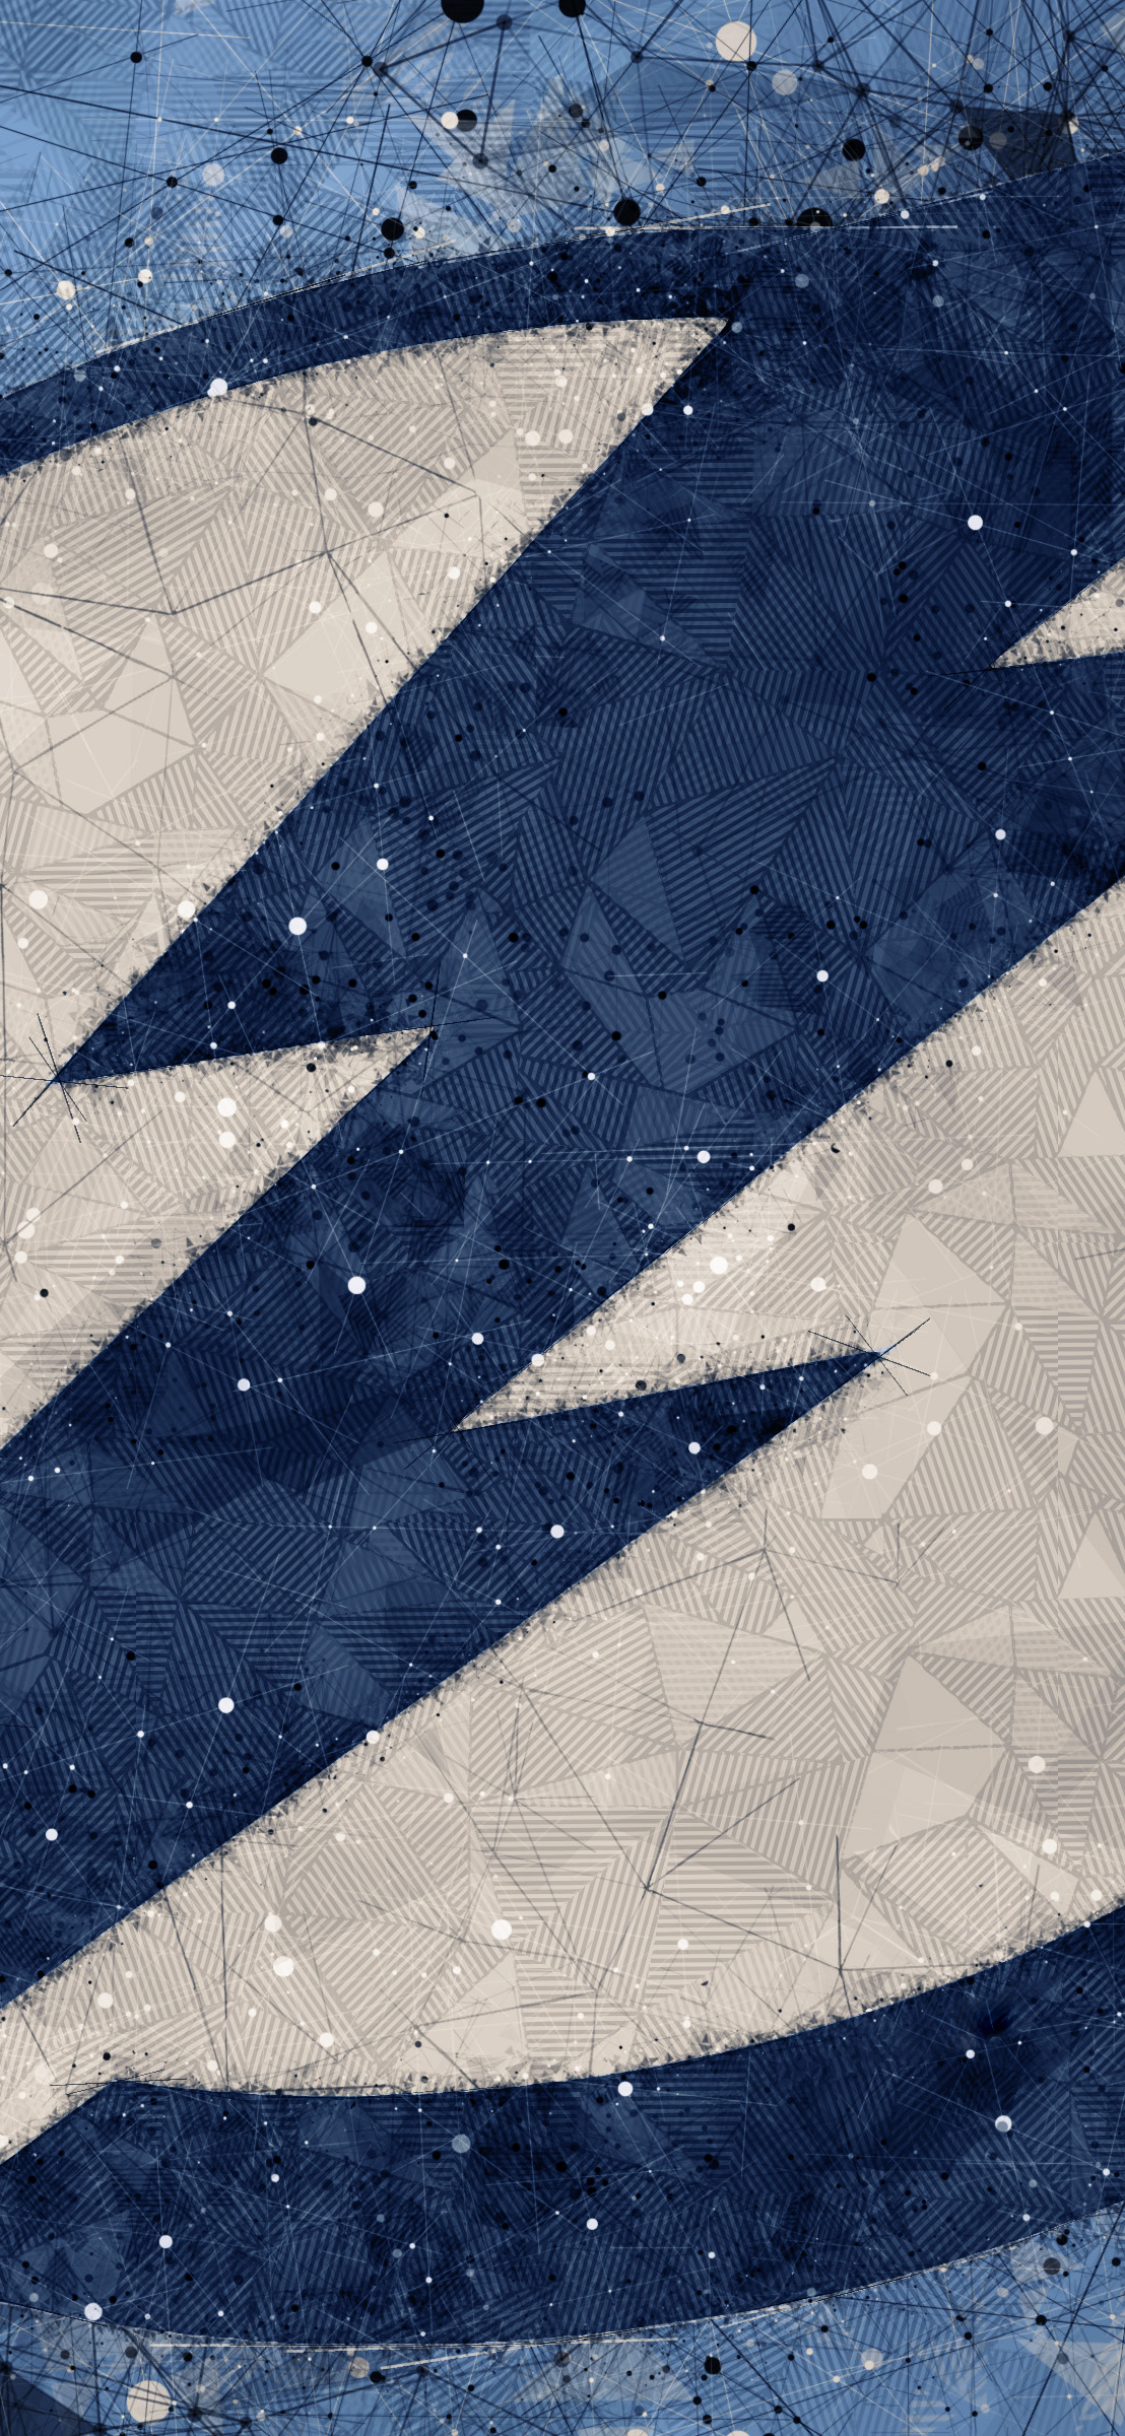 Thank you Tampa Bay Lightning” wallpaper download - Raw Charge